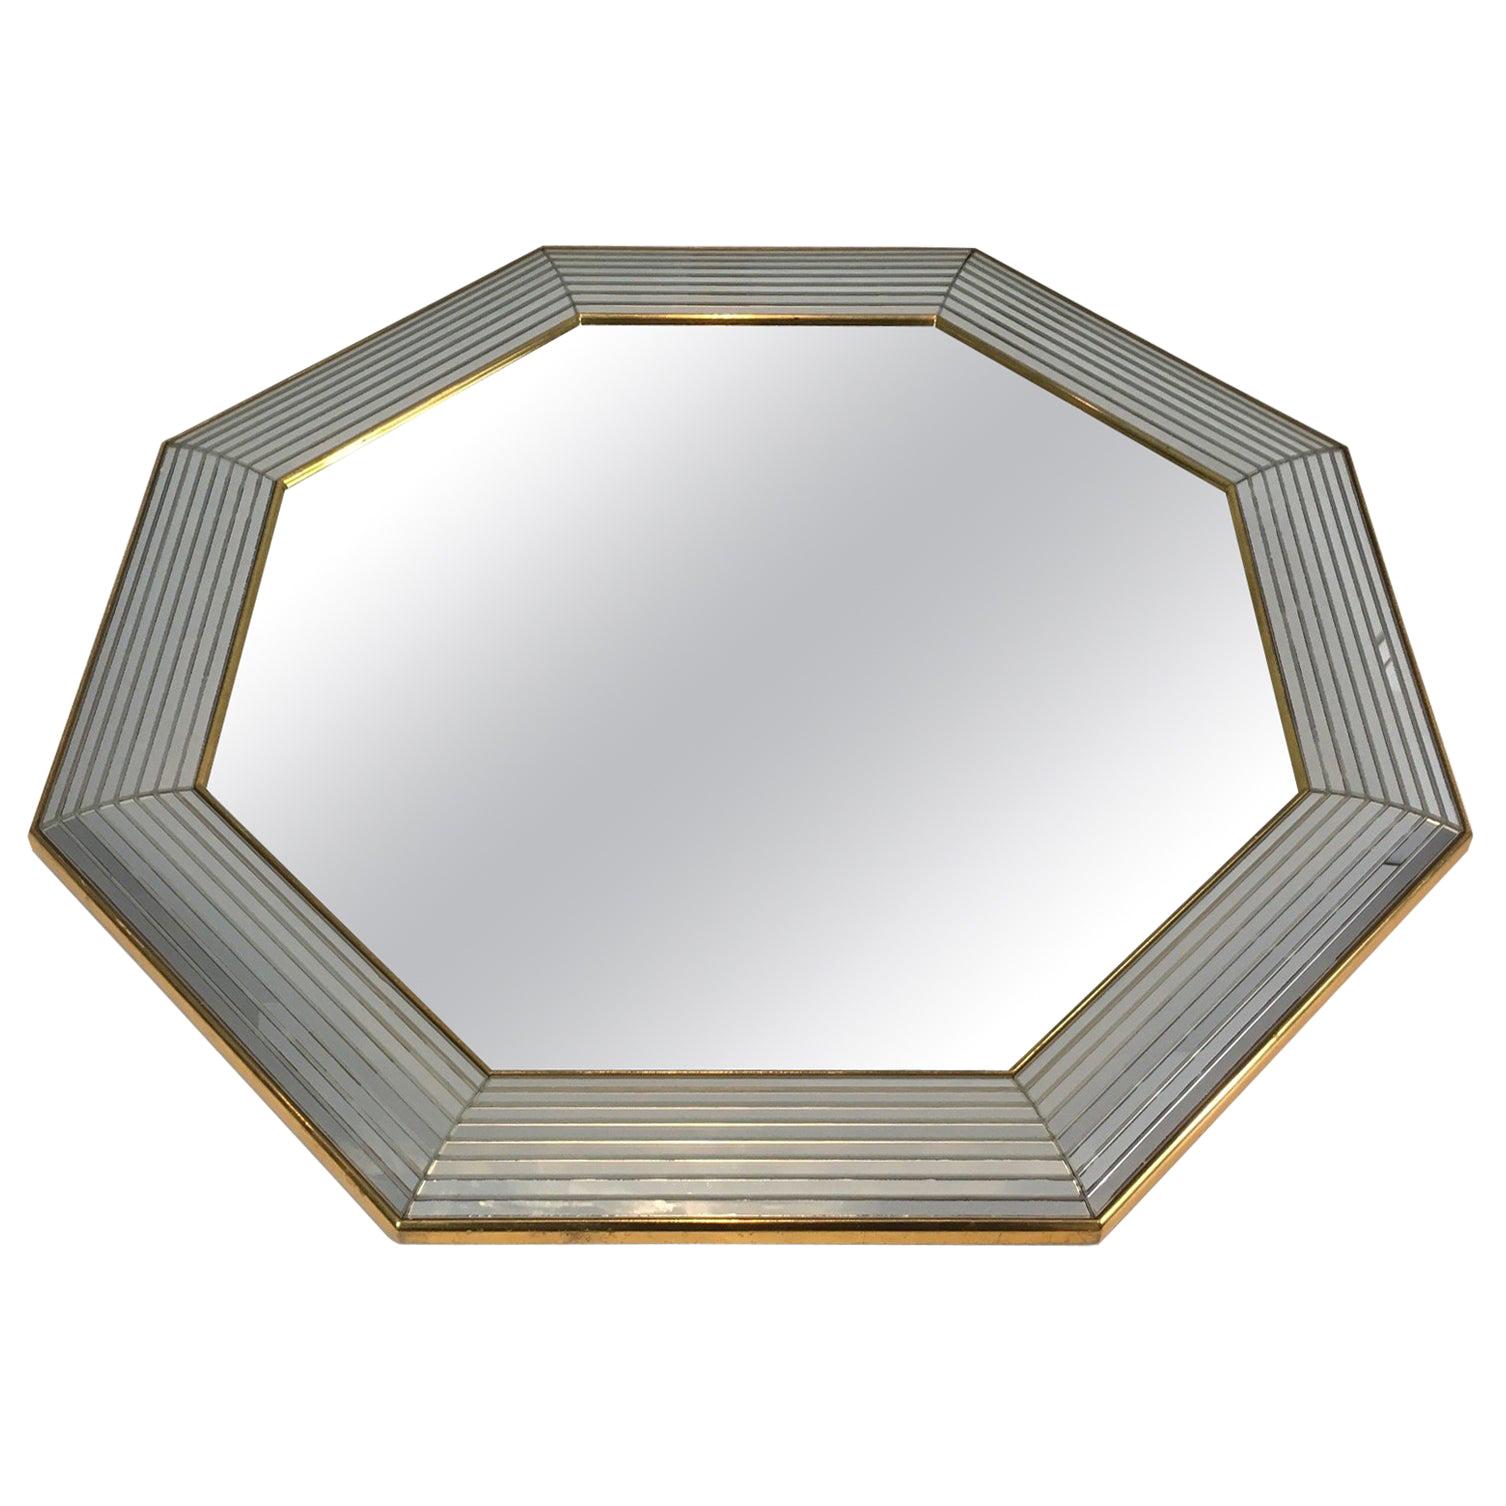 Octagonal Mirror with Lucite on the Sides, French, circa 1970